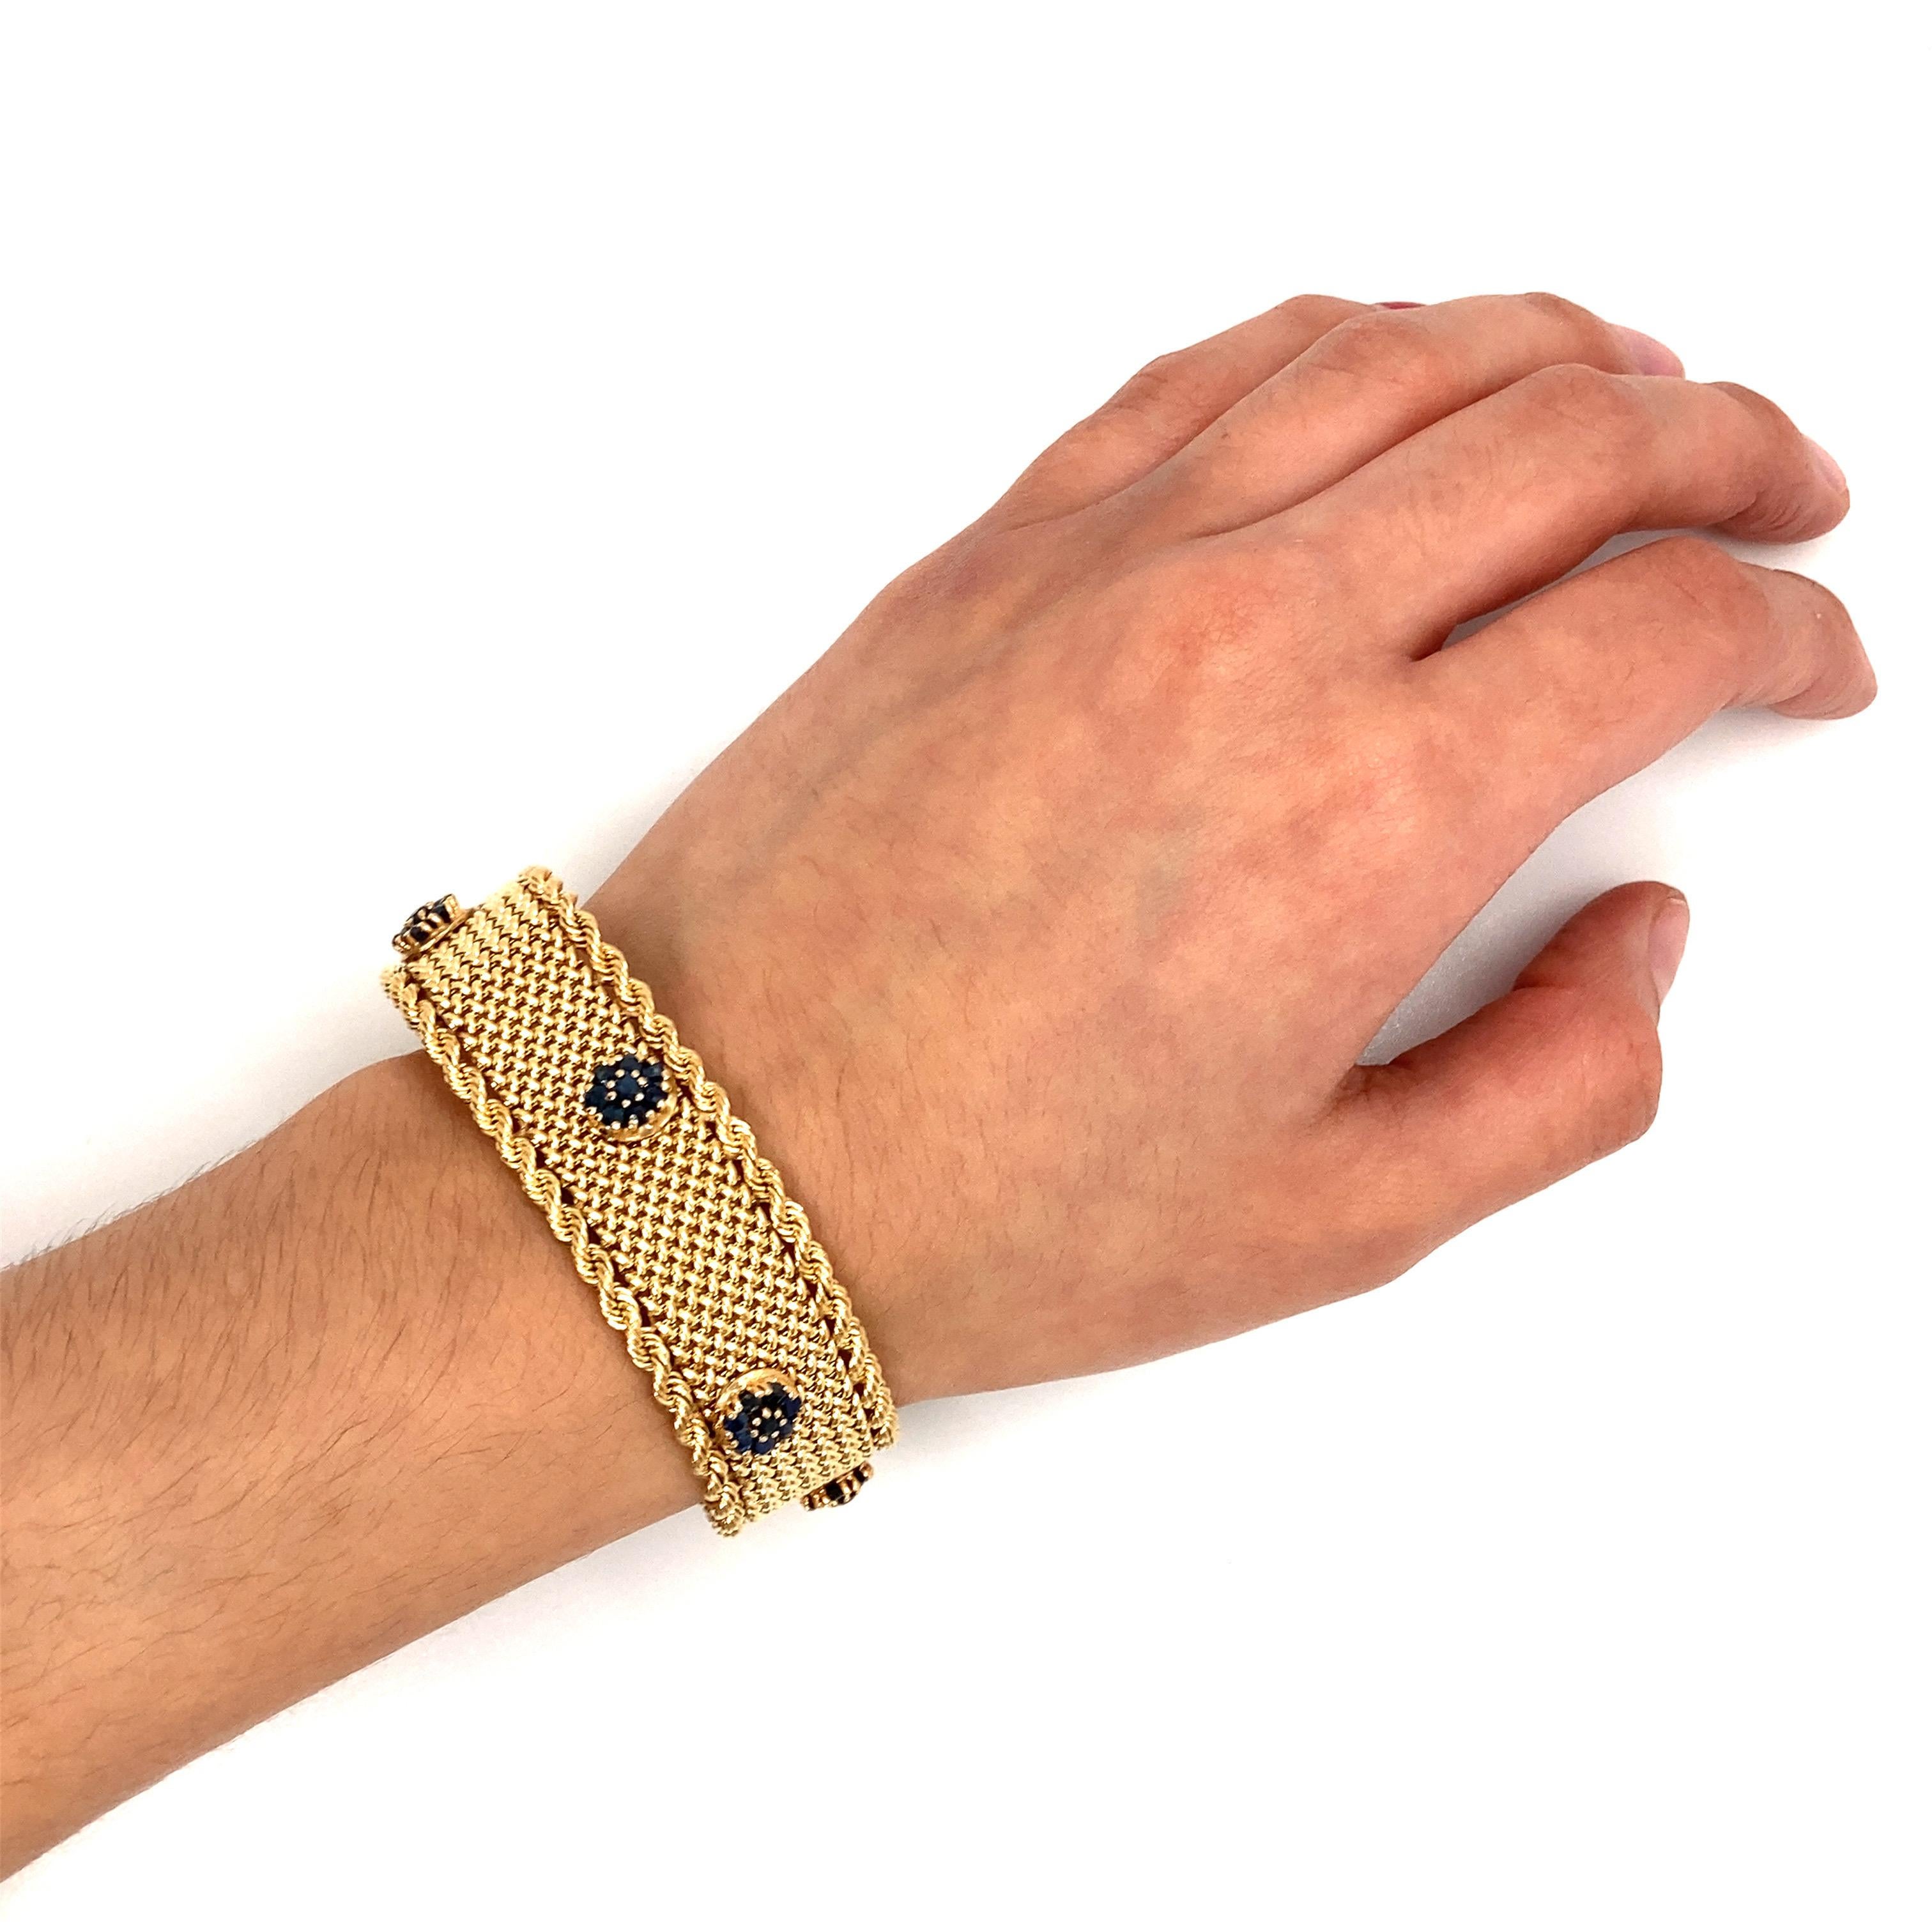 This exquisite vintage bracelet is a true statement piece. Crafted in luxurious 14K yellow gold, it features a striking mesh design that shimmers with a captivating drape. The bracelet measures an elegant 3/4 inches wide and 7 inches in length,